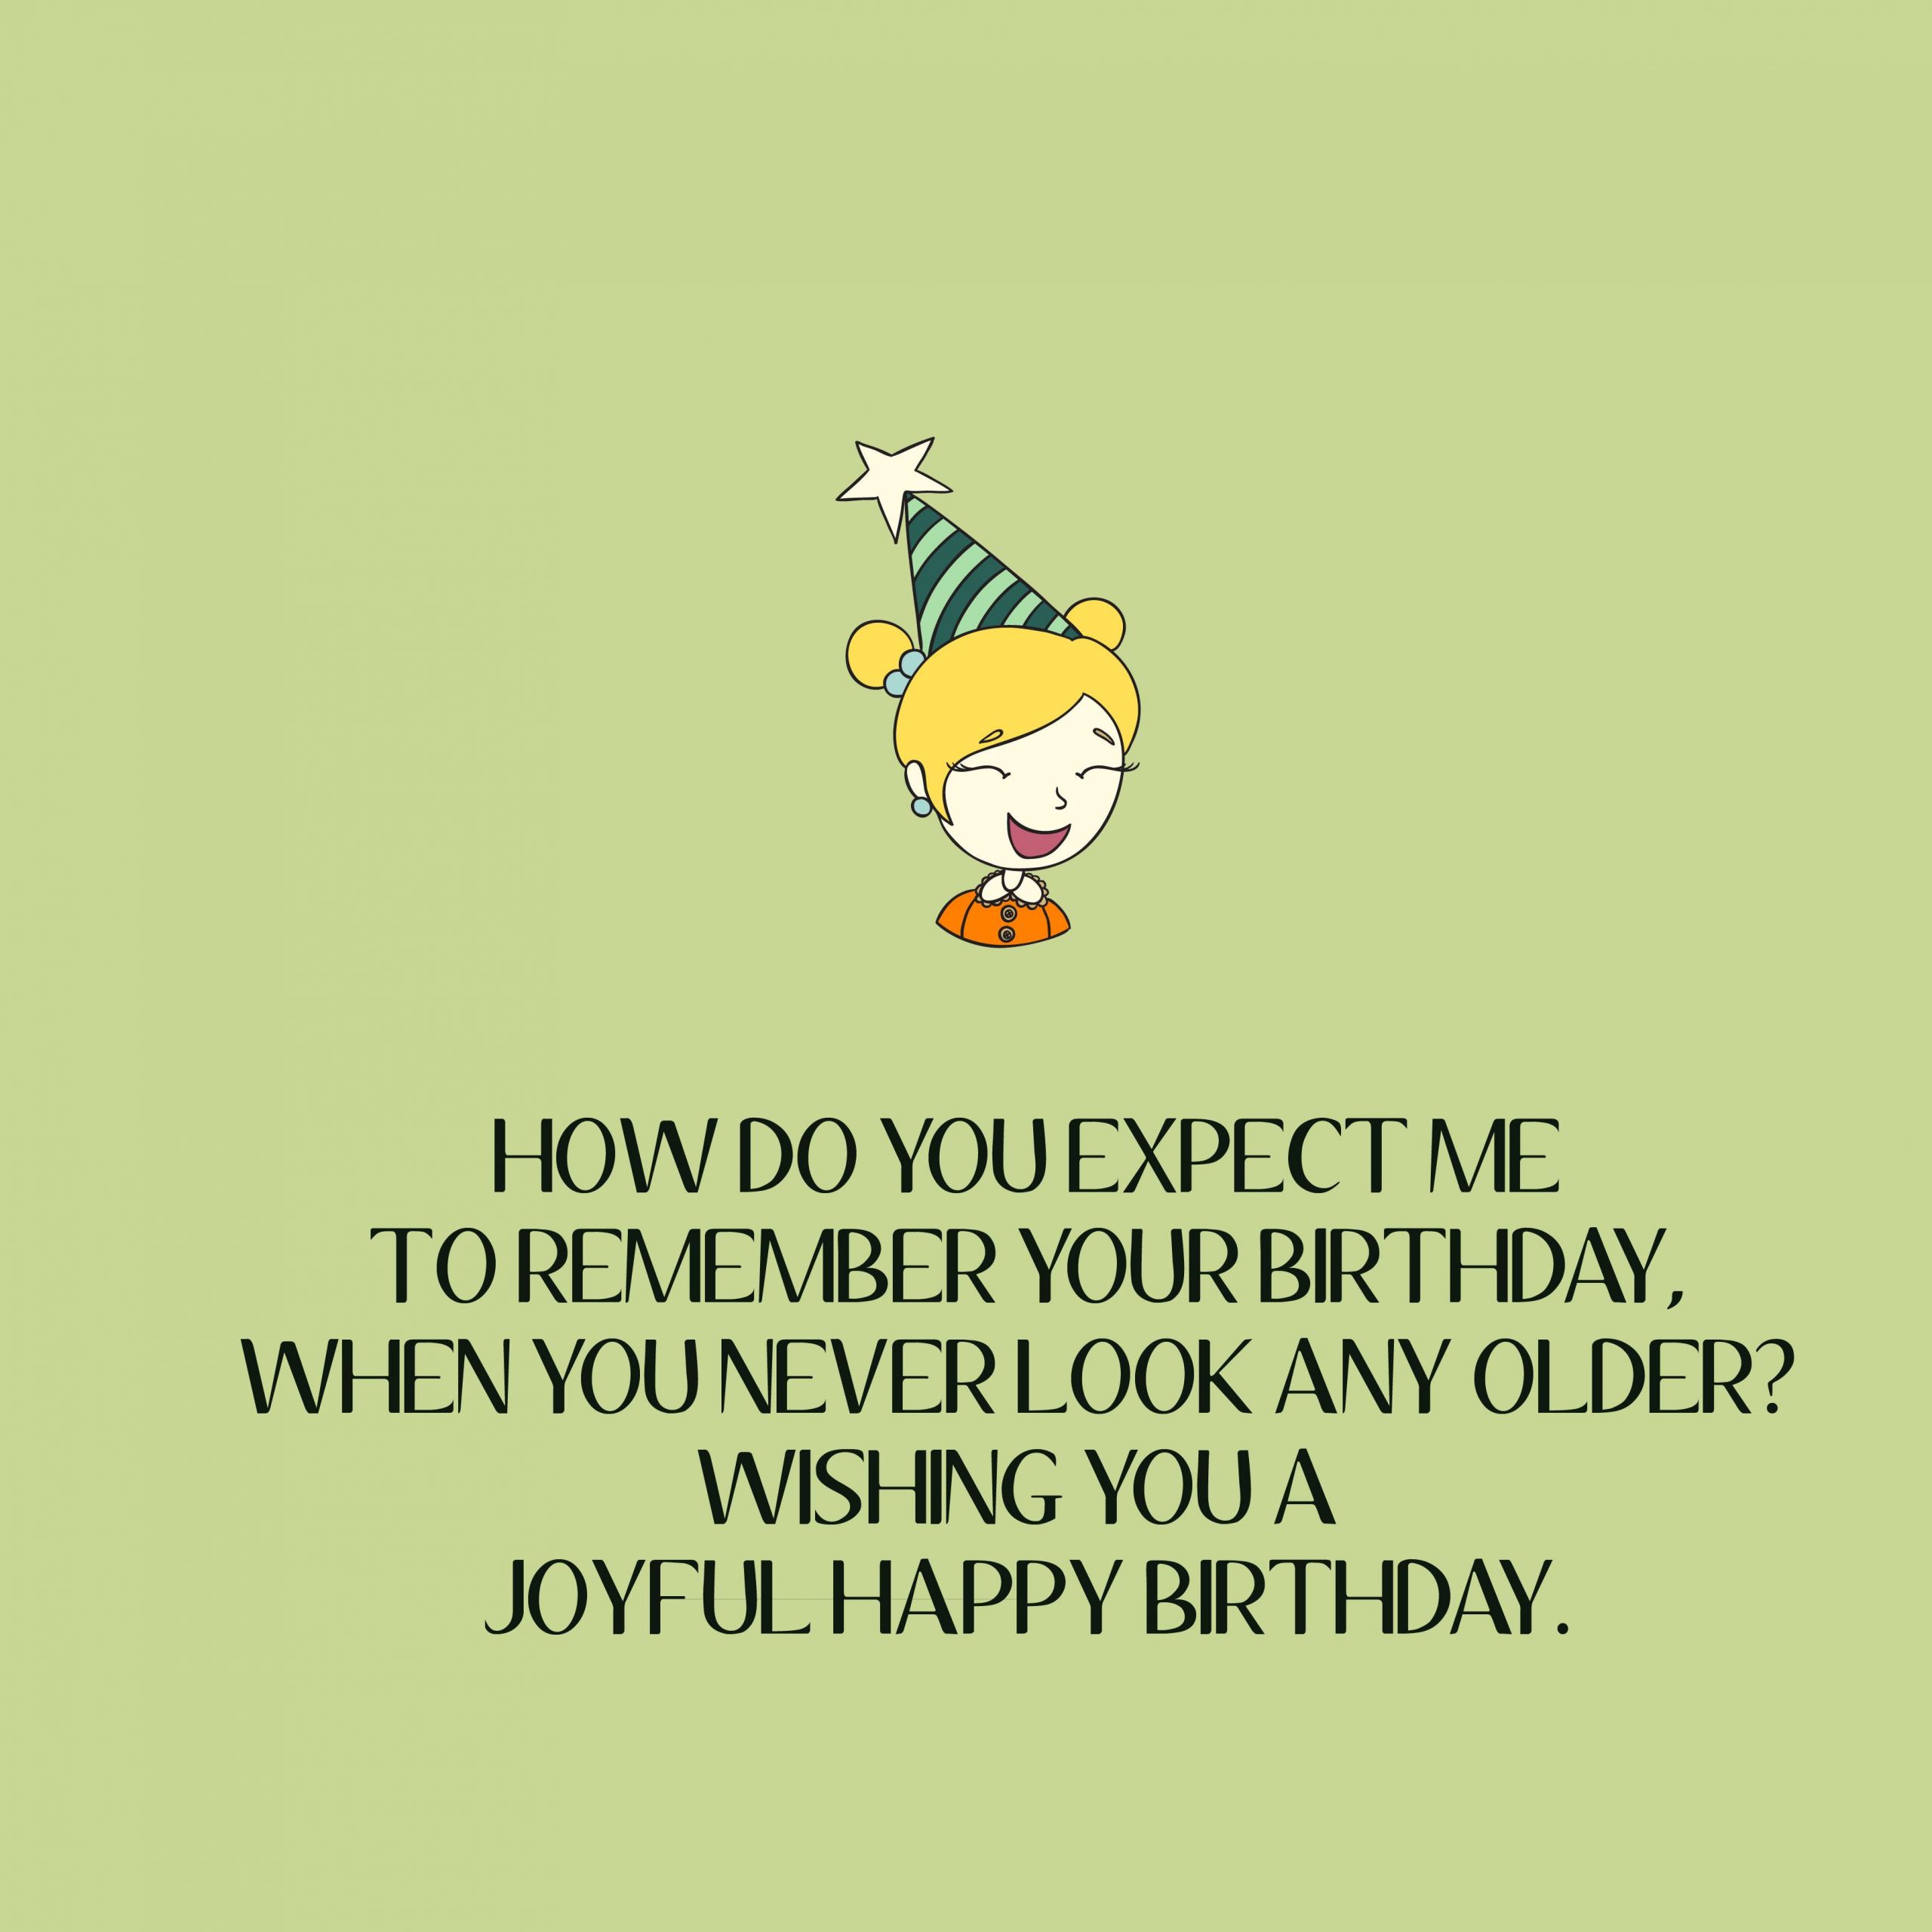 Birthday Images With Quotes
 Funny Happy Birthday Quotes Top Happy Birthday Wishes